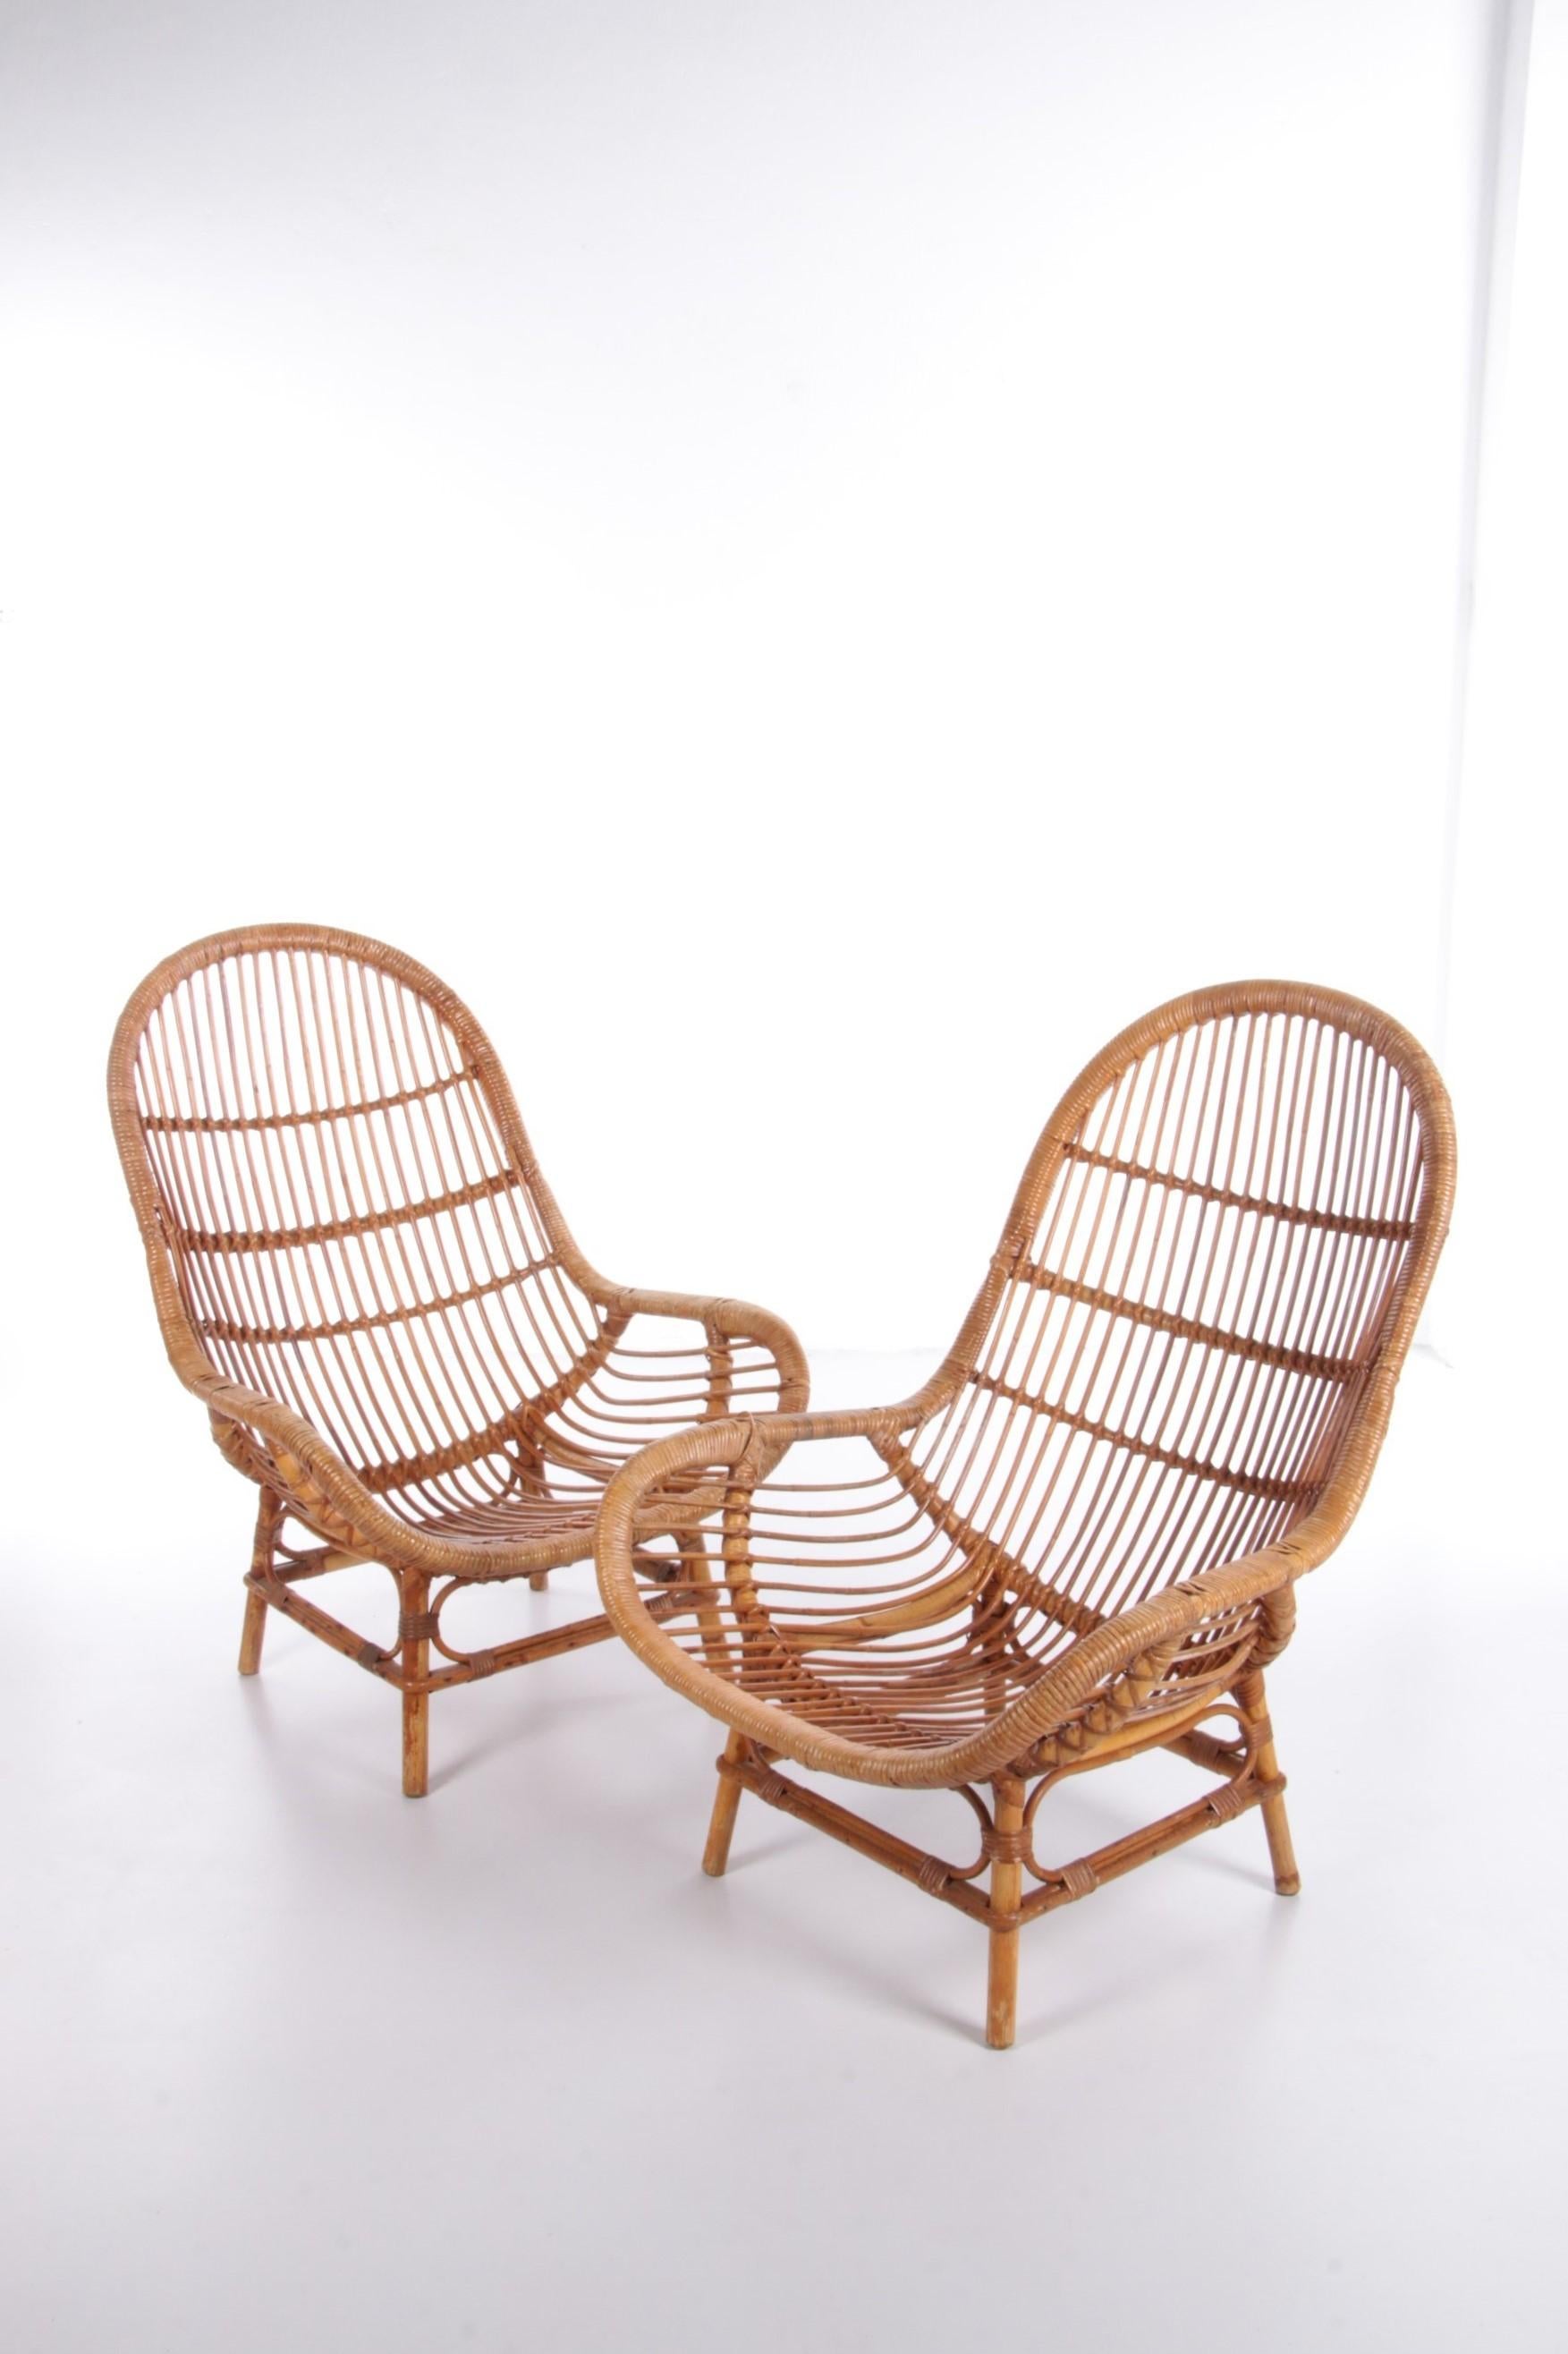 Vintage set of 2 bamboo chairs 1960 France.

Vintage set of 2 bamboo chairs made in France in the 1960s.

Super beautiful on your terrace, porch or under a tree in your garden. These will certainly get the Bohemian vibes all the way.

Or if you have